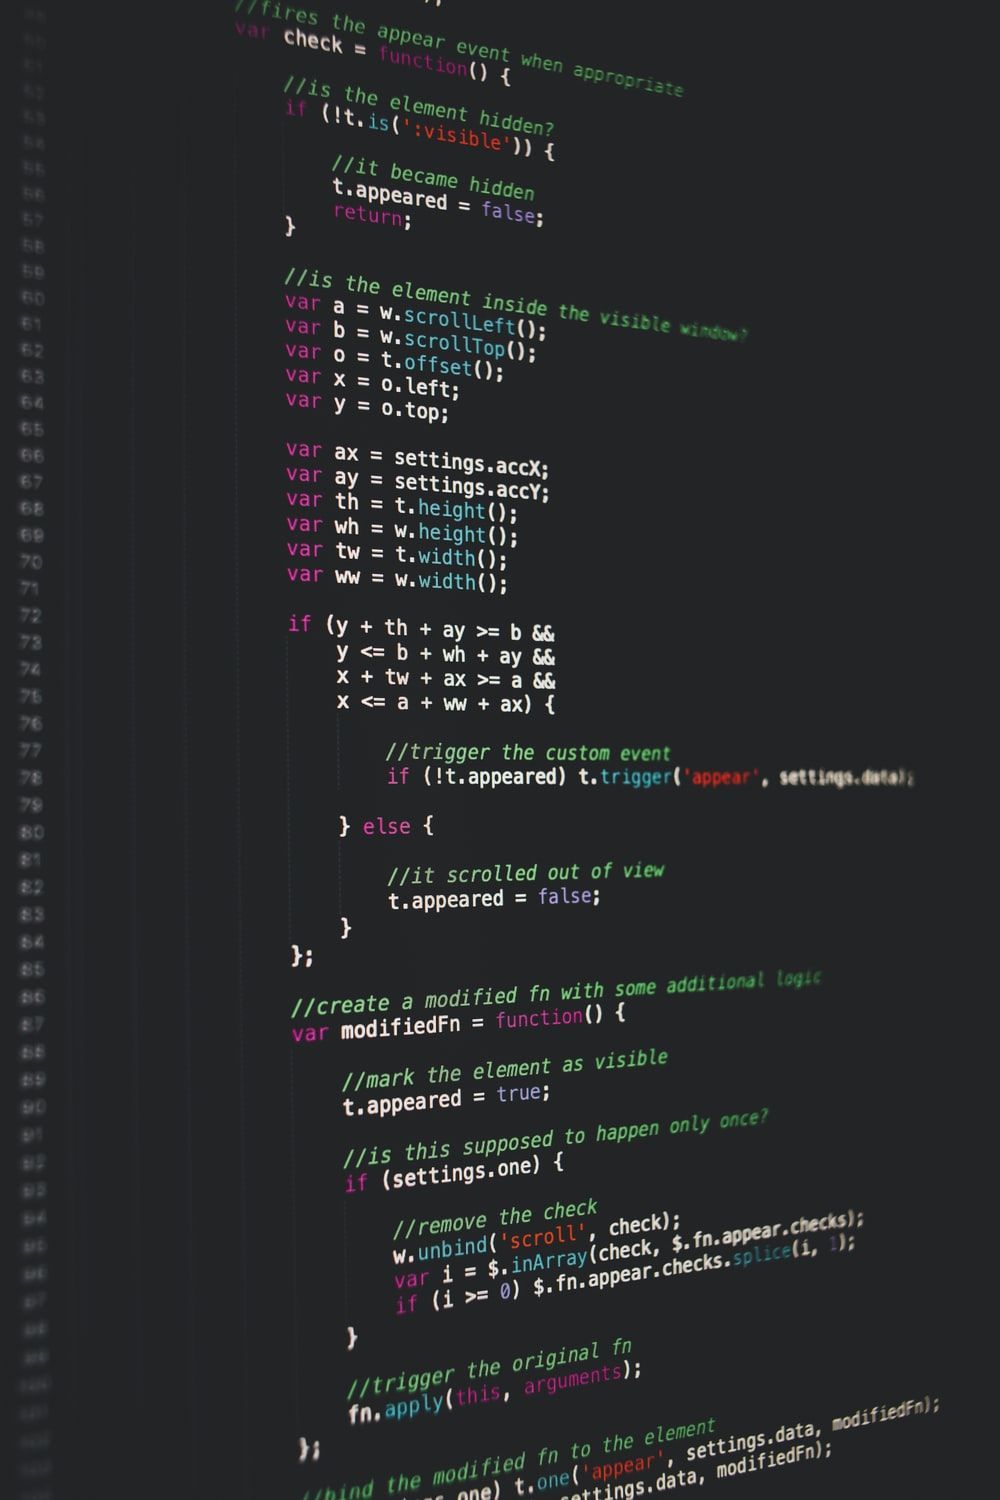 Programming Wallpapers, Coder - APK Download for Android